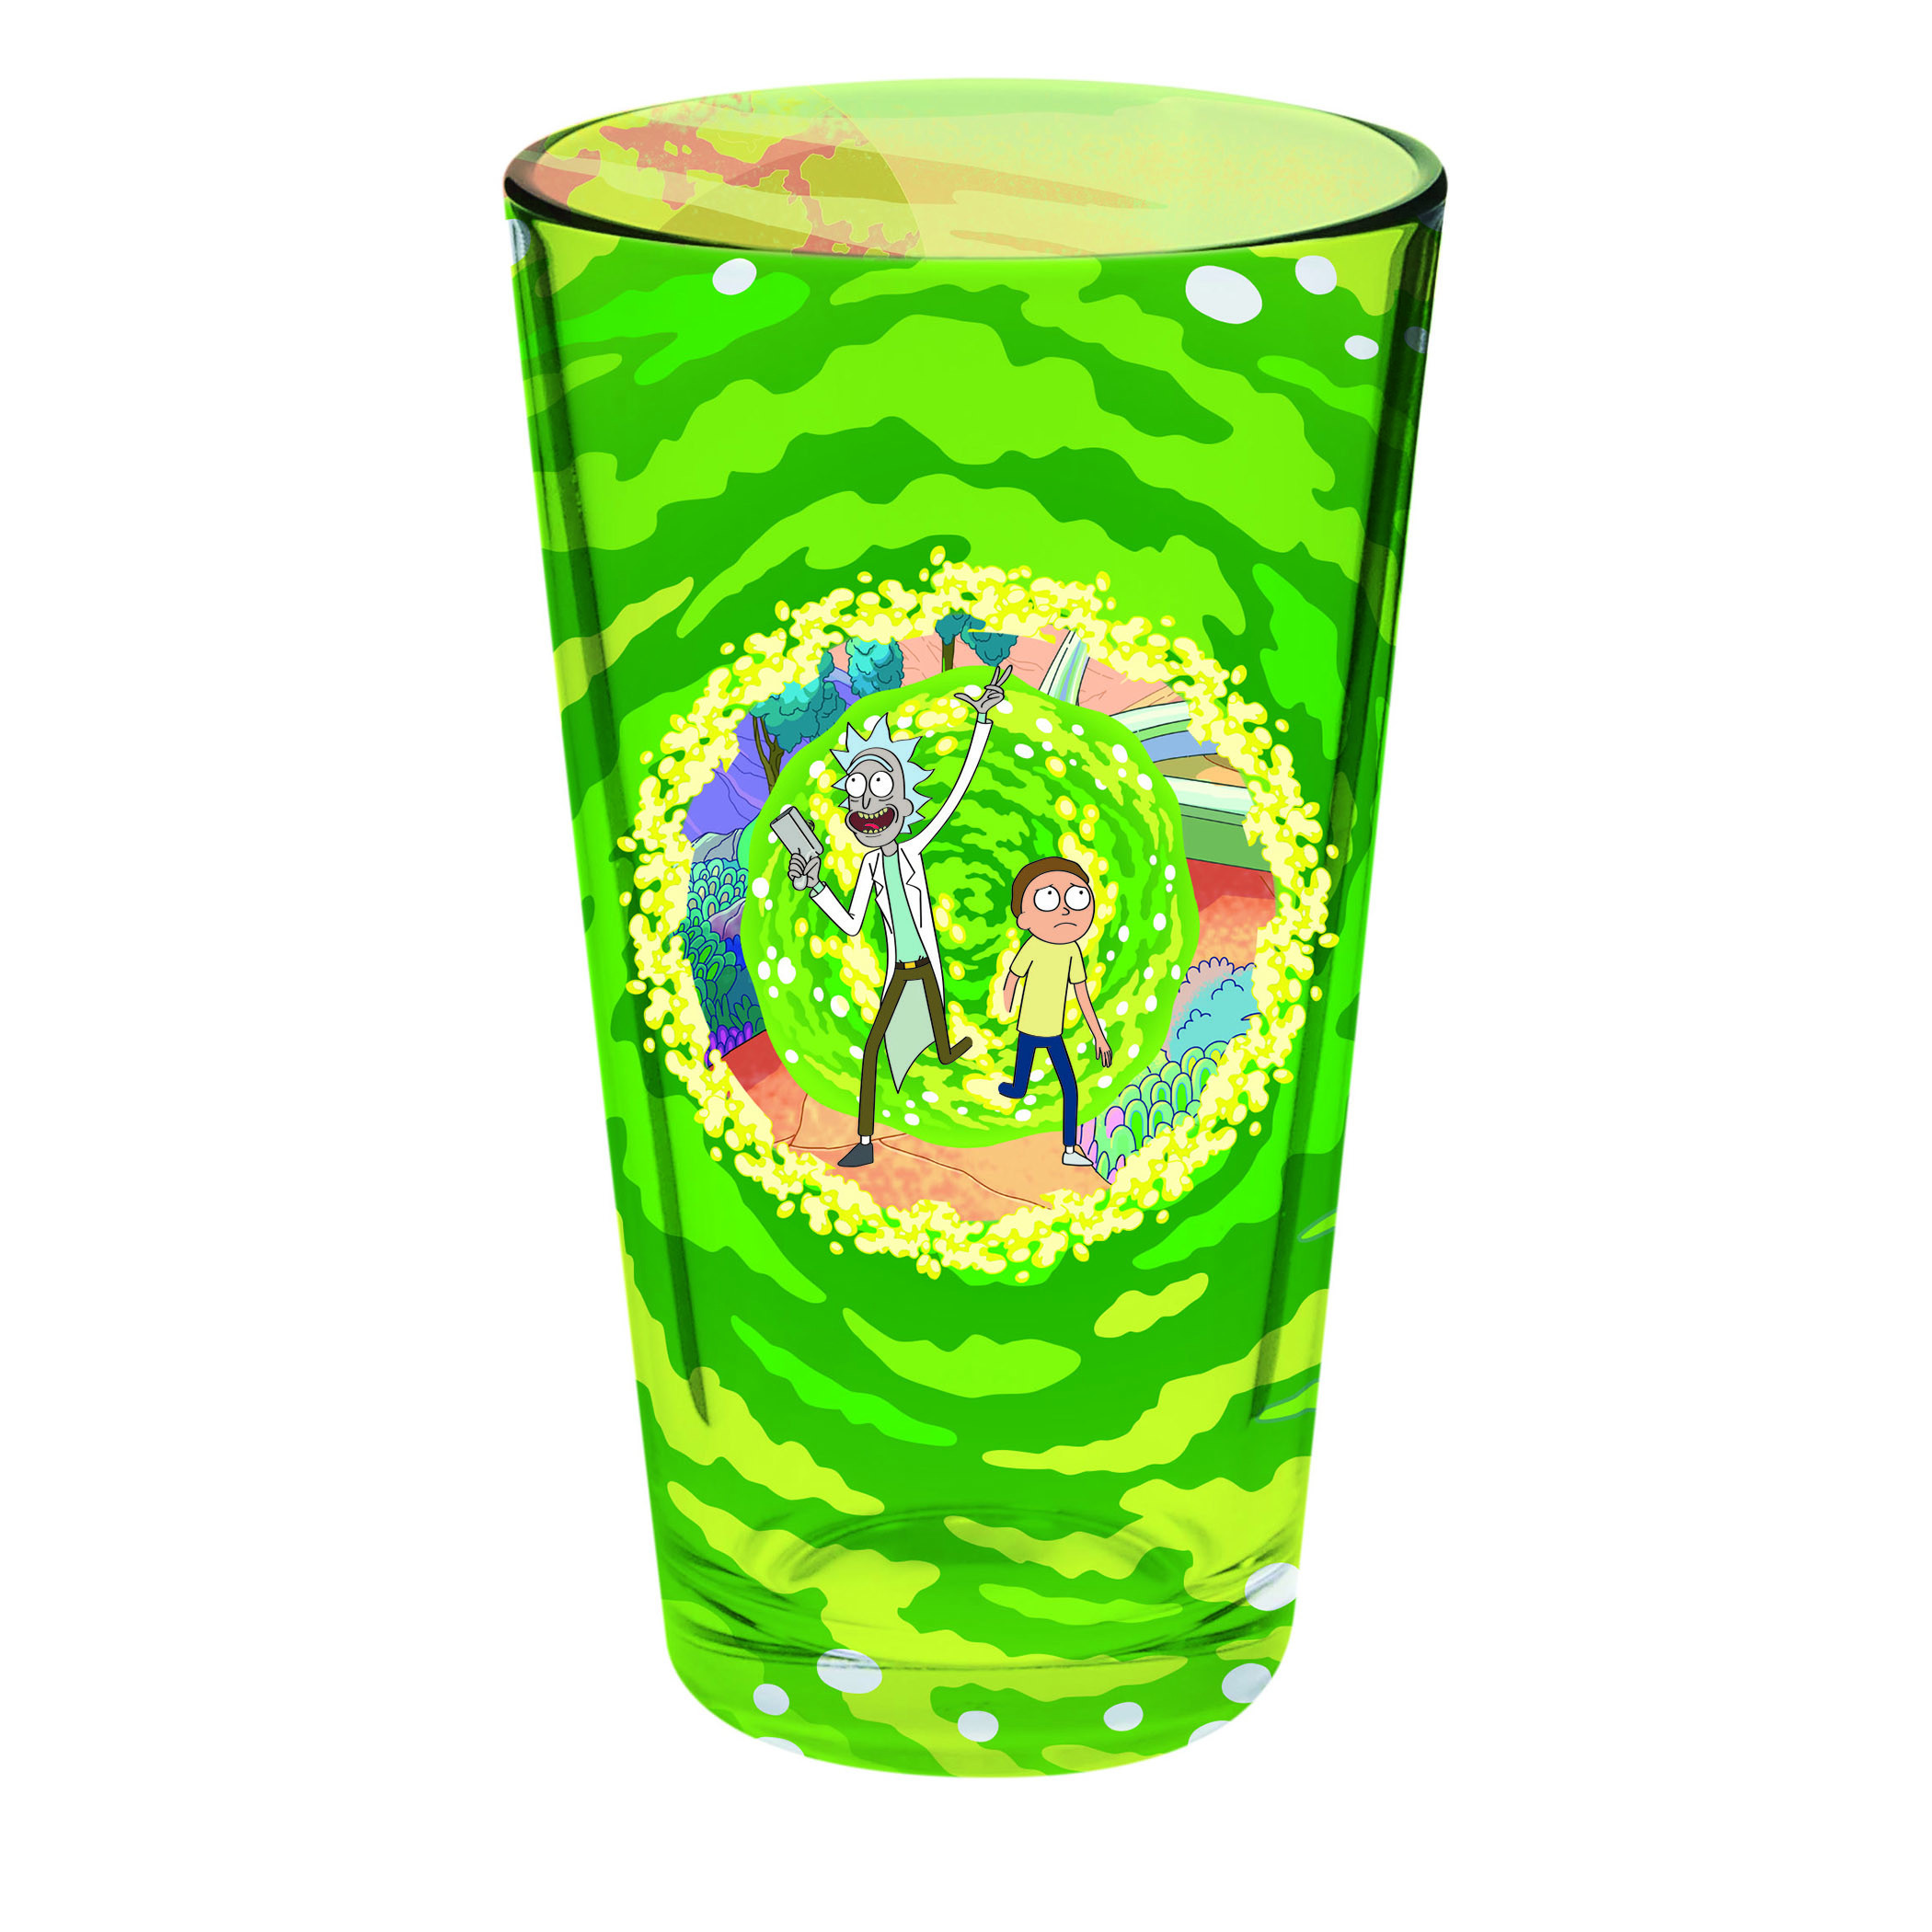 Rick and Morty Portal Decal Wrapped Pint Glass